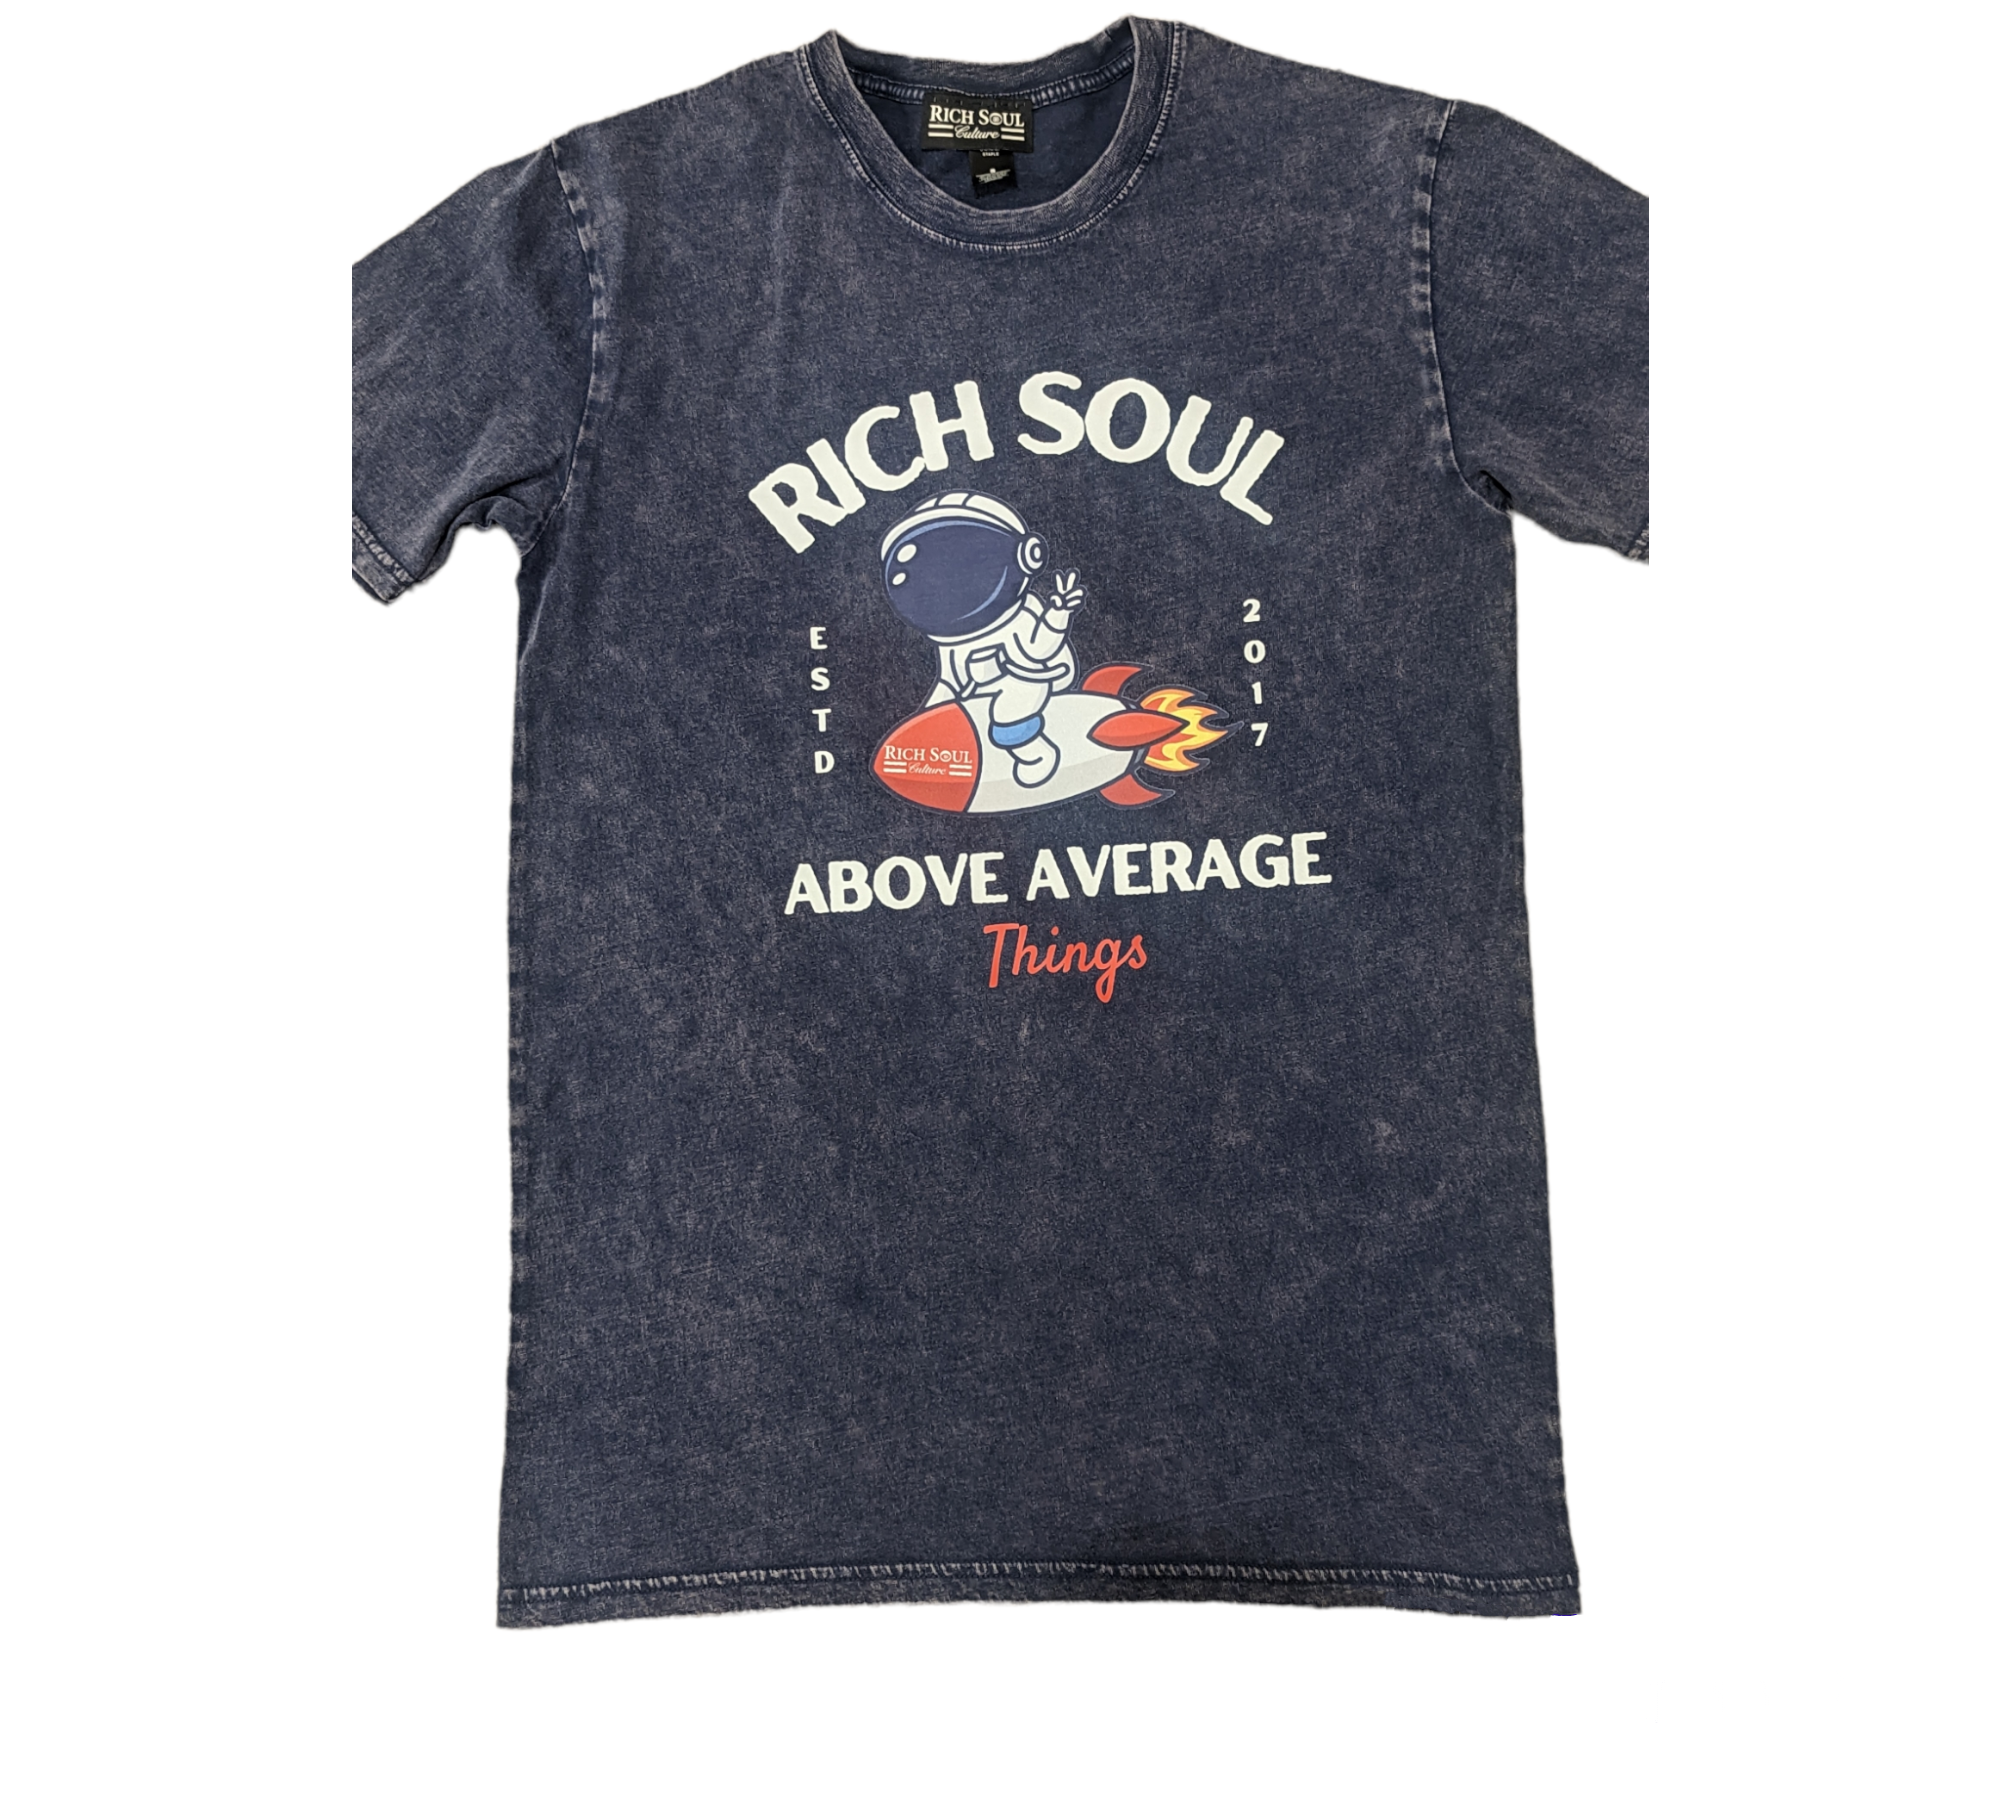 Rich Soul Culture - Above Average Things Graphic Tee